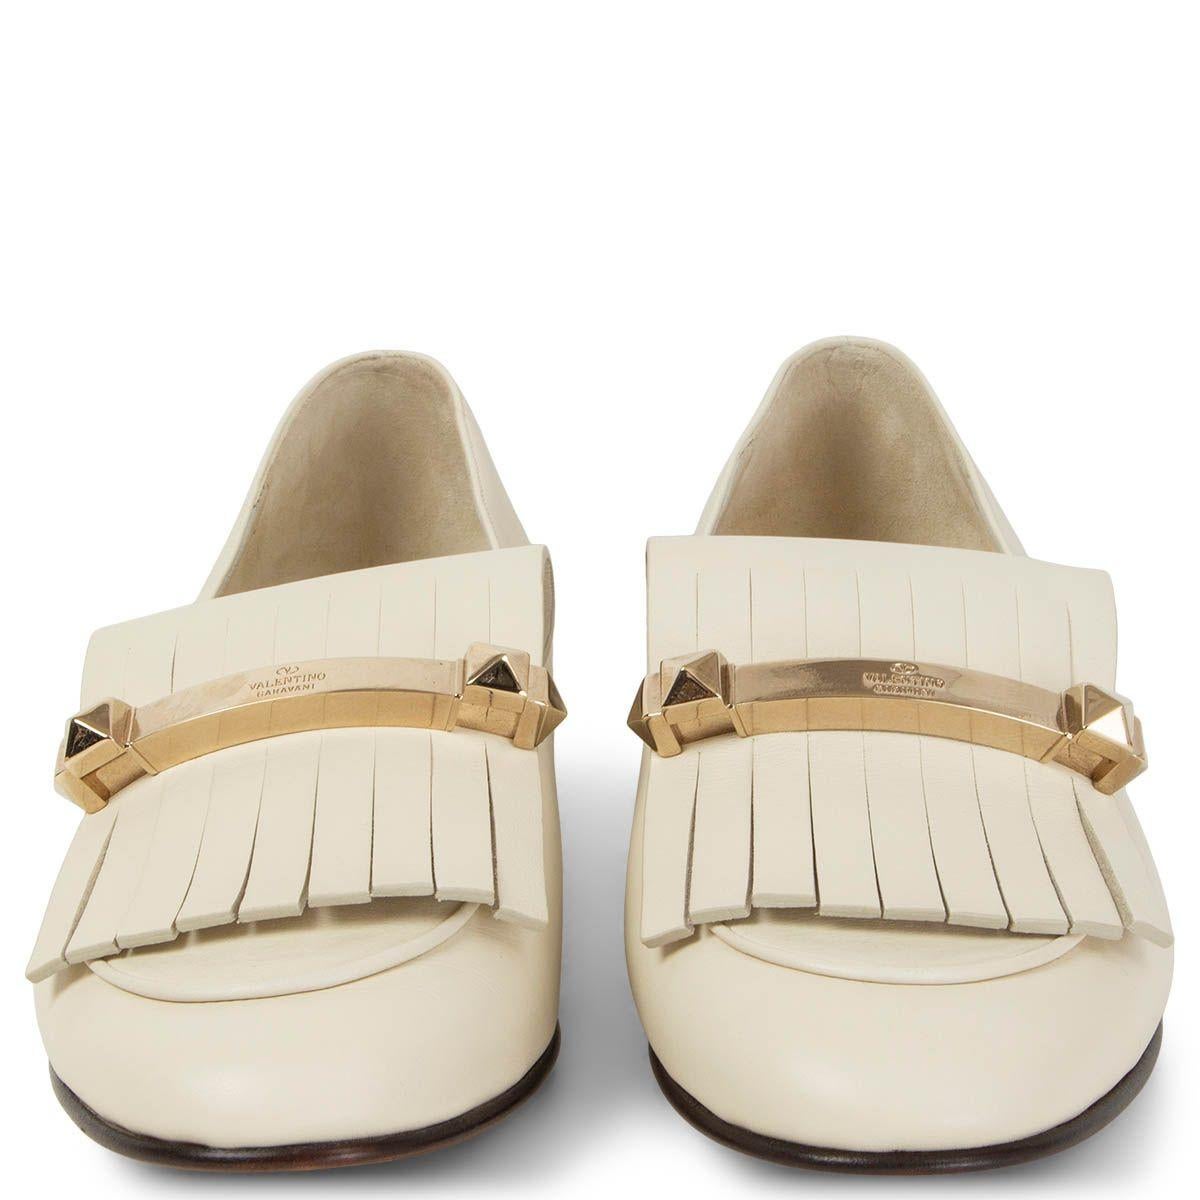 100% authentic Valentino Uptown embellished fringed ivory leather loafers featuring light gold-tone hardware and a stacked heel. Brand new. Come with dust bag.

Measurements
Imprinted Size	39.5
Shoe Size	39.5
Inside Sole	26.5cm (10.3in)
Width	7.5cm